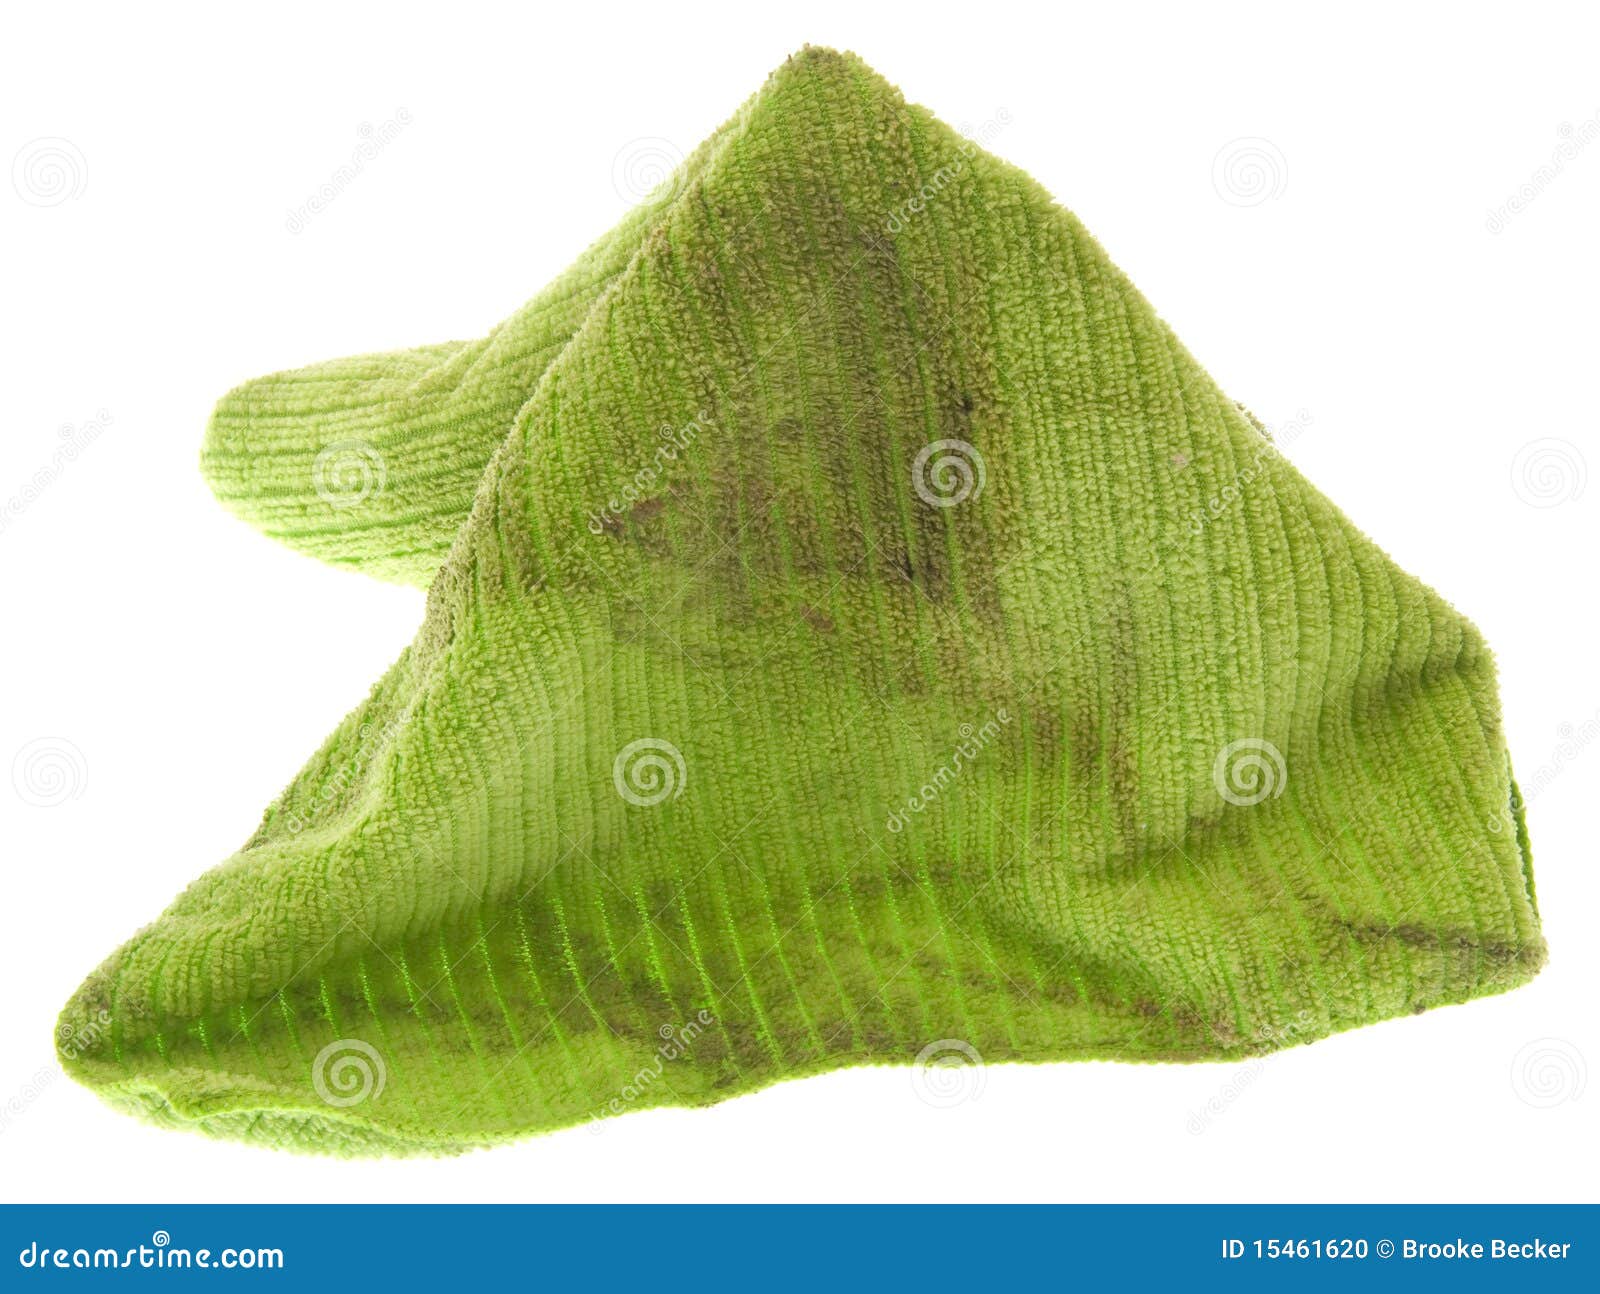 Dirty Kitchen Rag stock photo. Image of isolated, dirty - 15461620